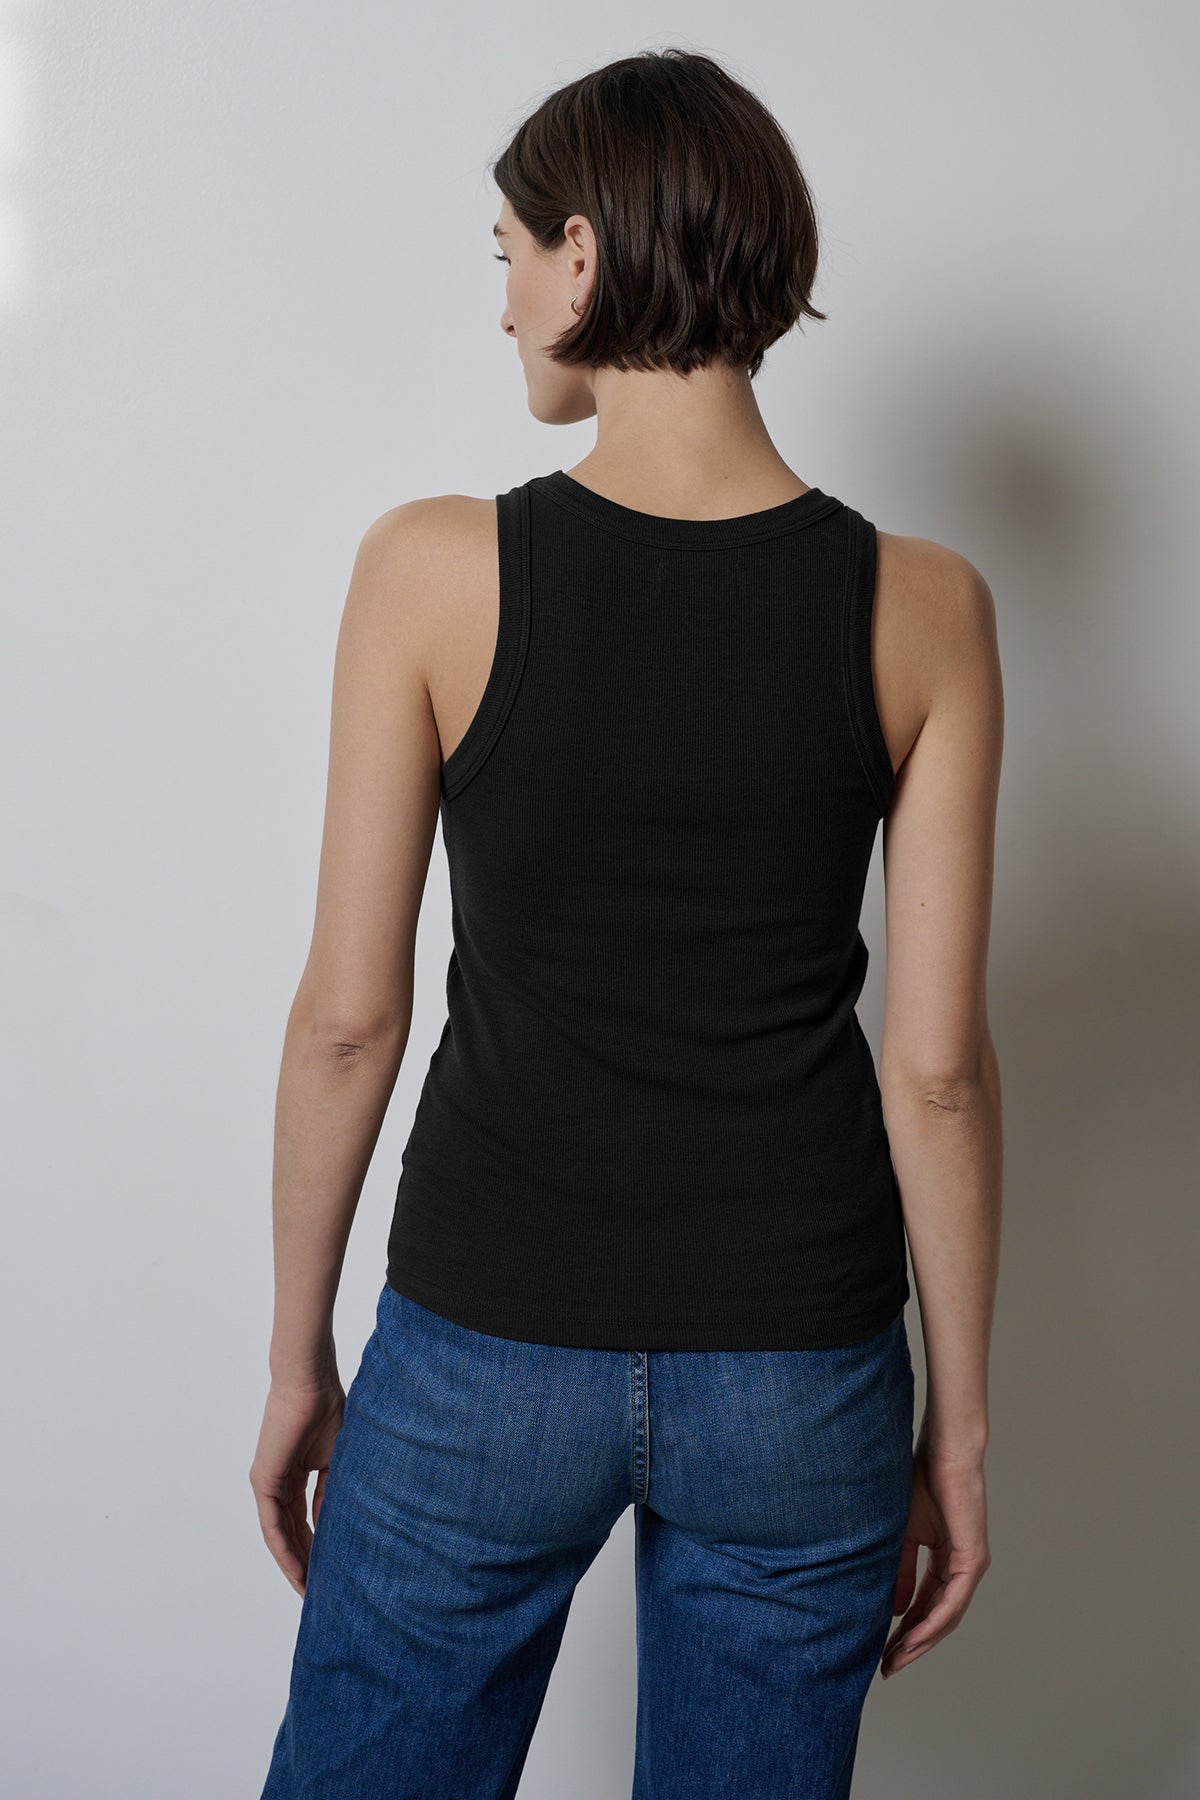 The woman's back reveals the stretch of her jeans and the weight of her Velvet by Jenny Graham CRUZ TANK TOP.-35417027870913